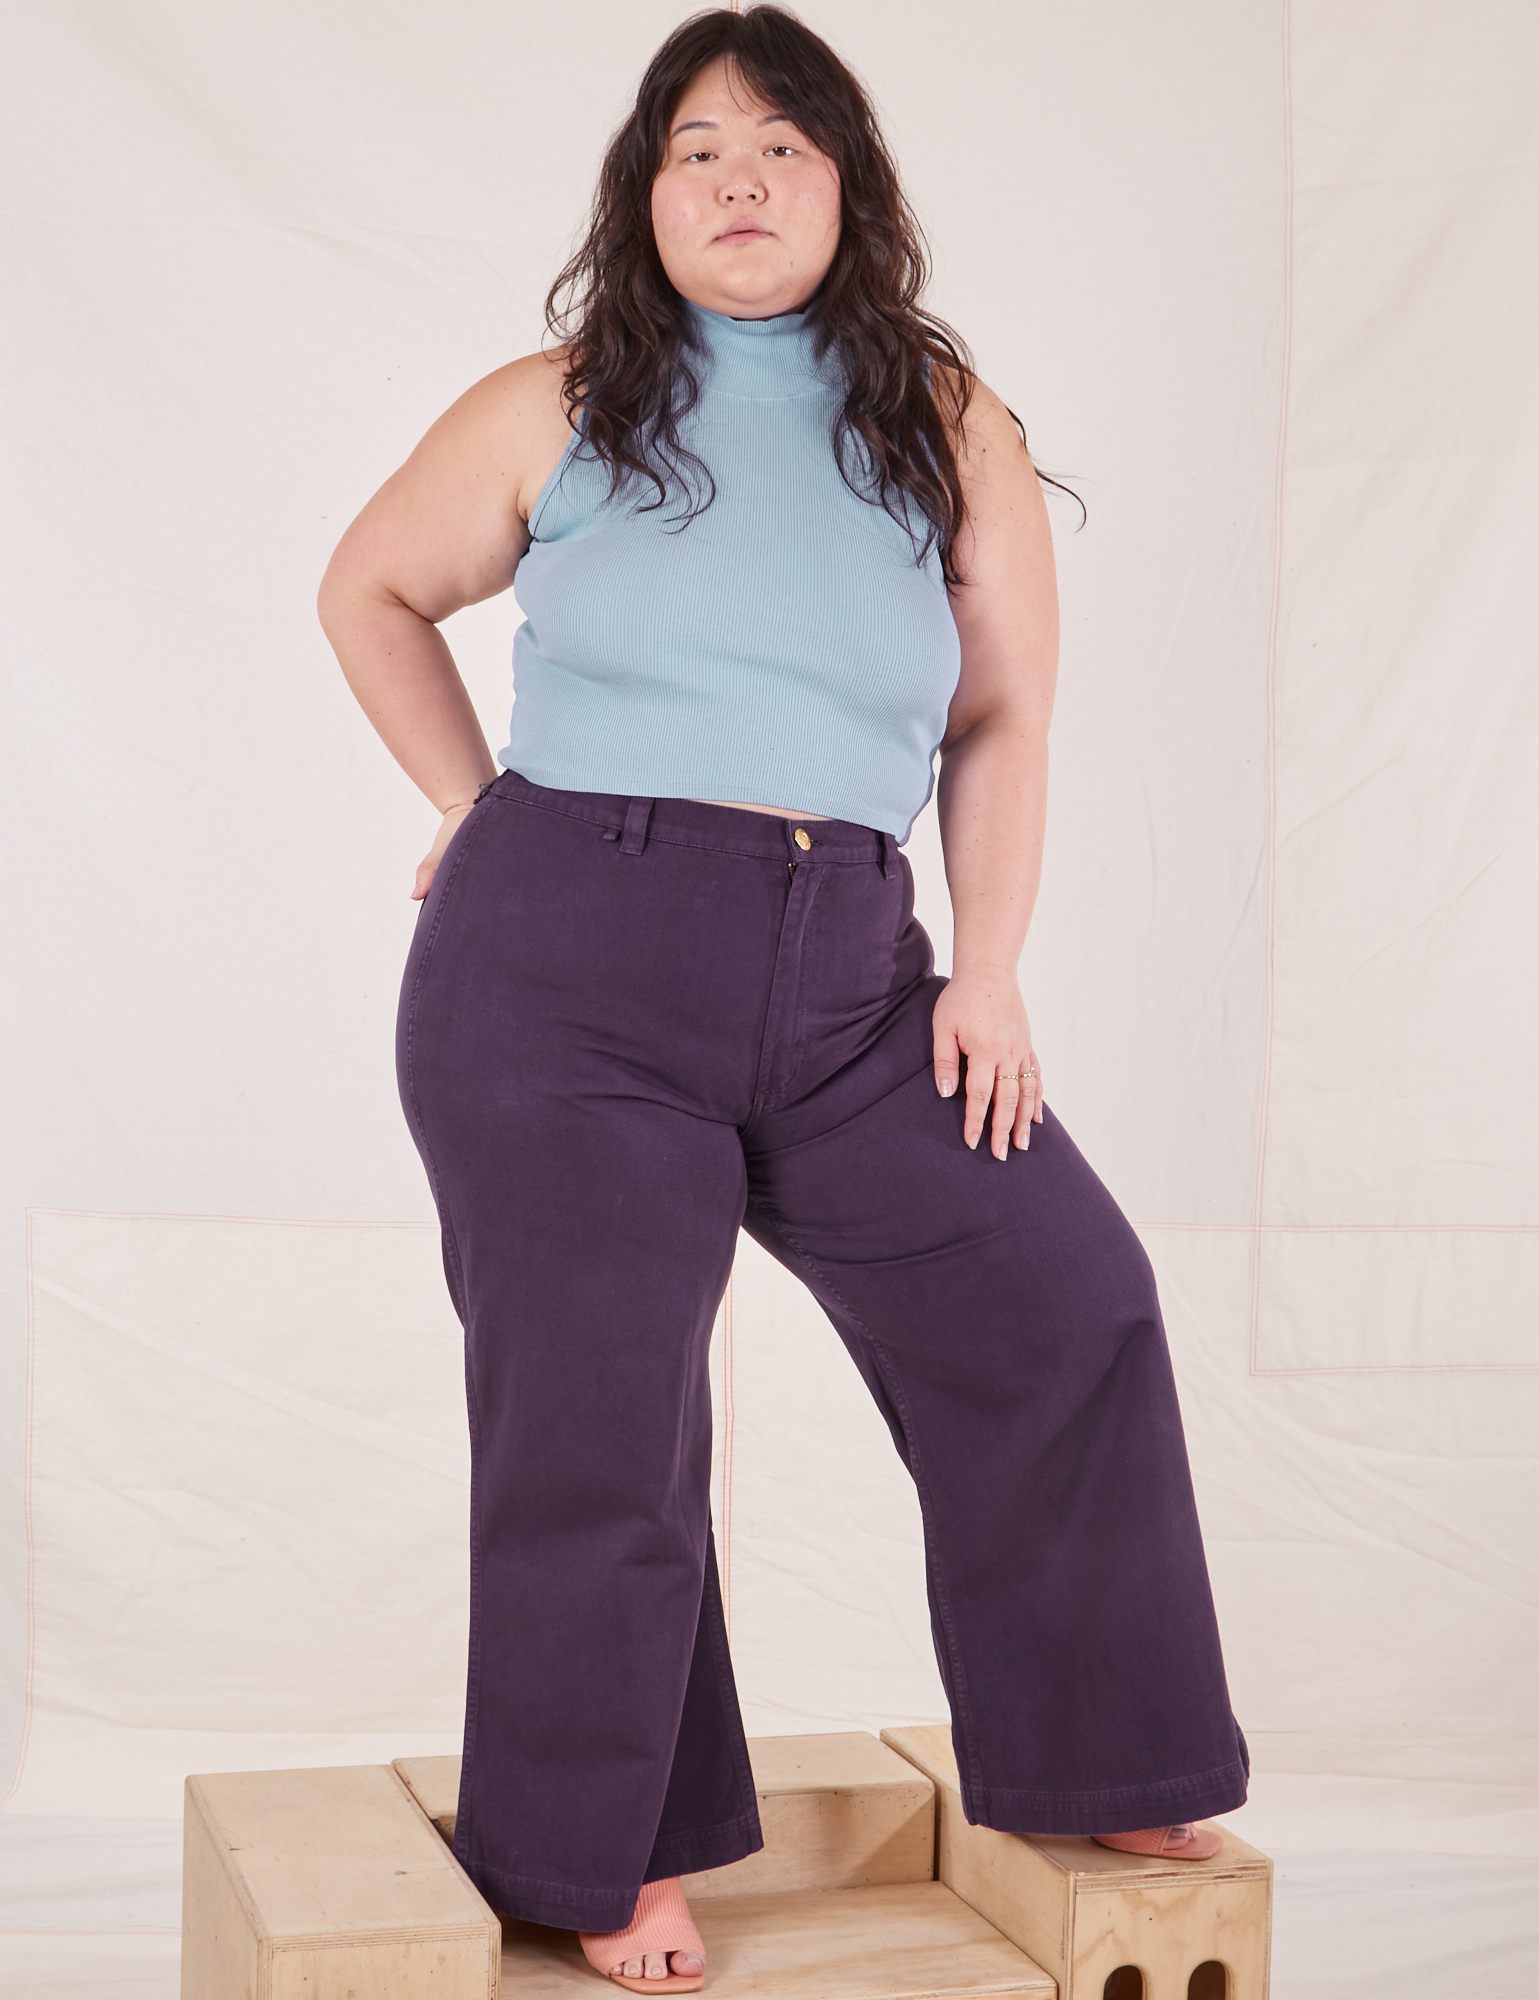 Ashley is wearing Sleeveless Essential Turtleneck in Periwinkle and nebula purple Bell Bottoms